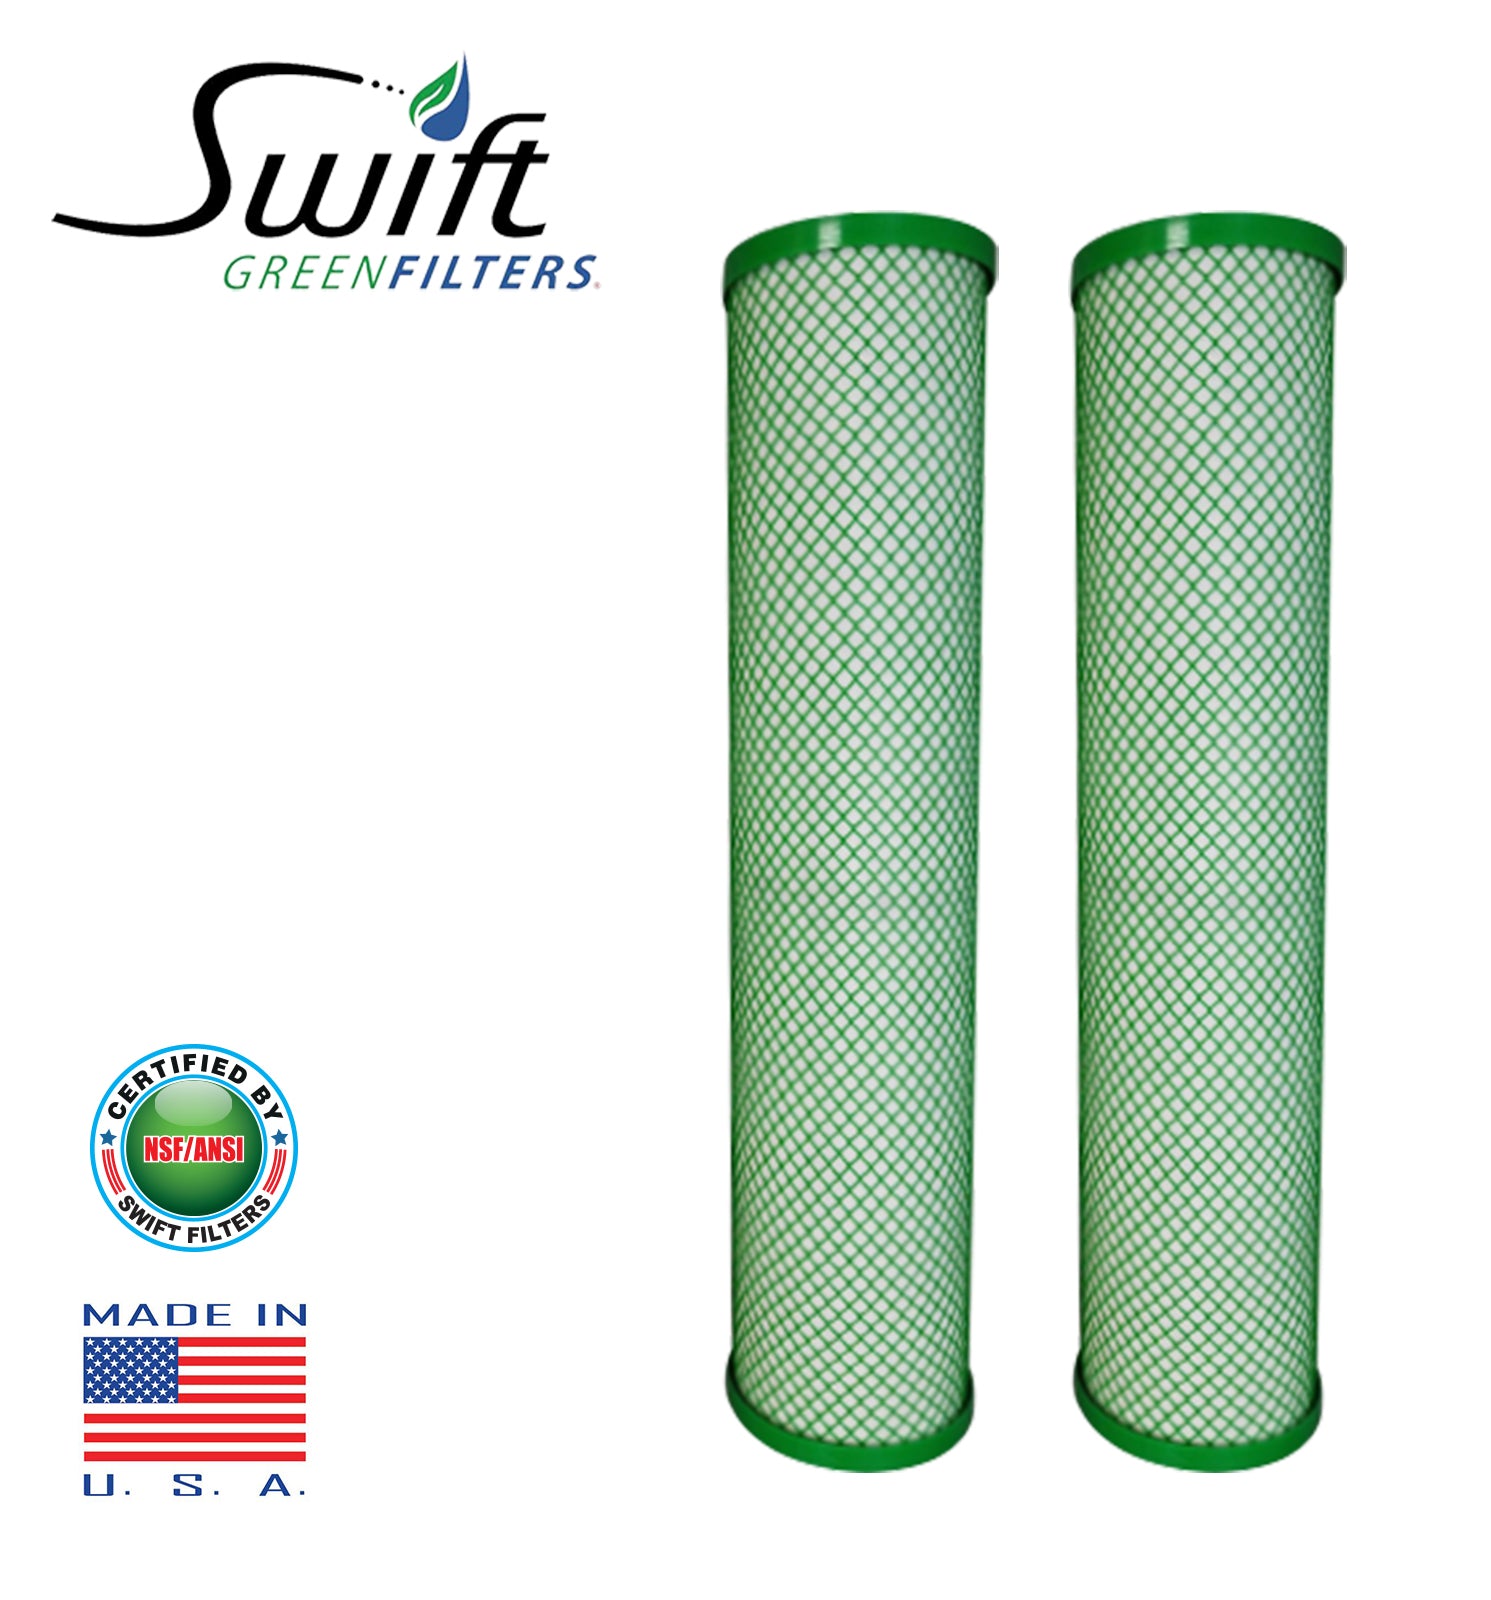 Swift (SGFB10CL2) 9.75"x 4.5" CL2 Green Block Carbon Filter 10 Micron By Swift Green Filters